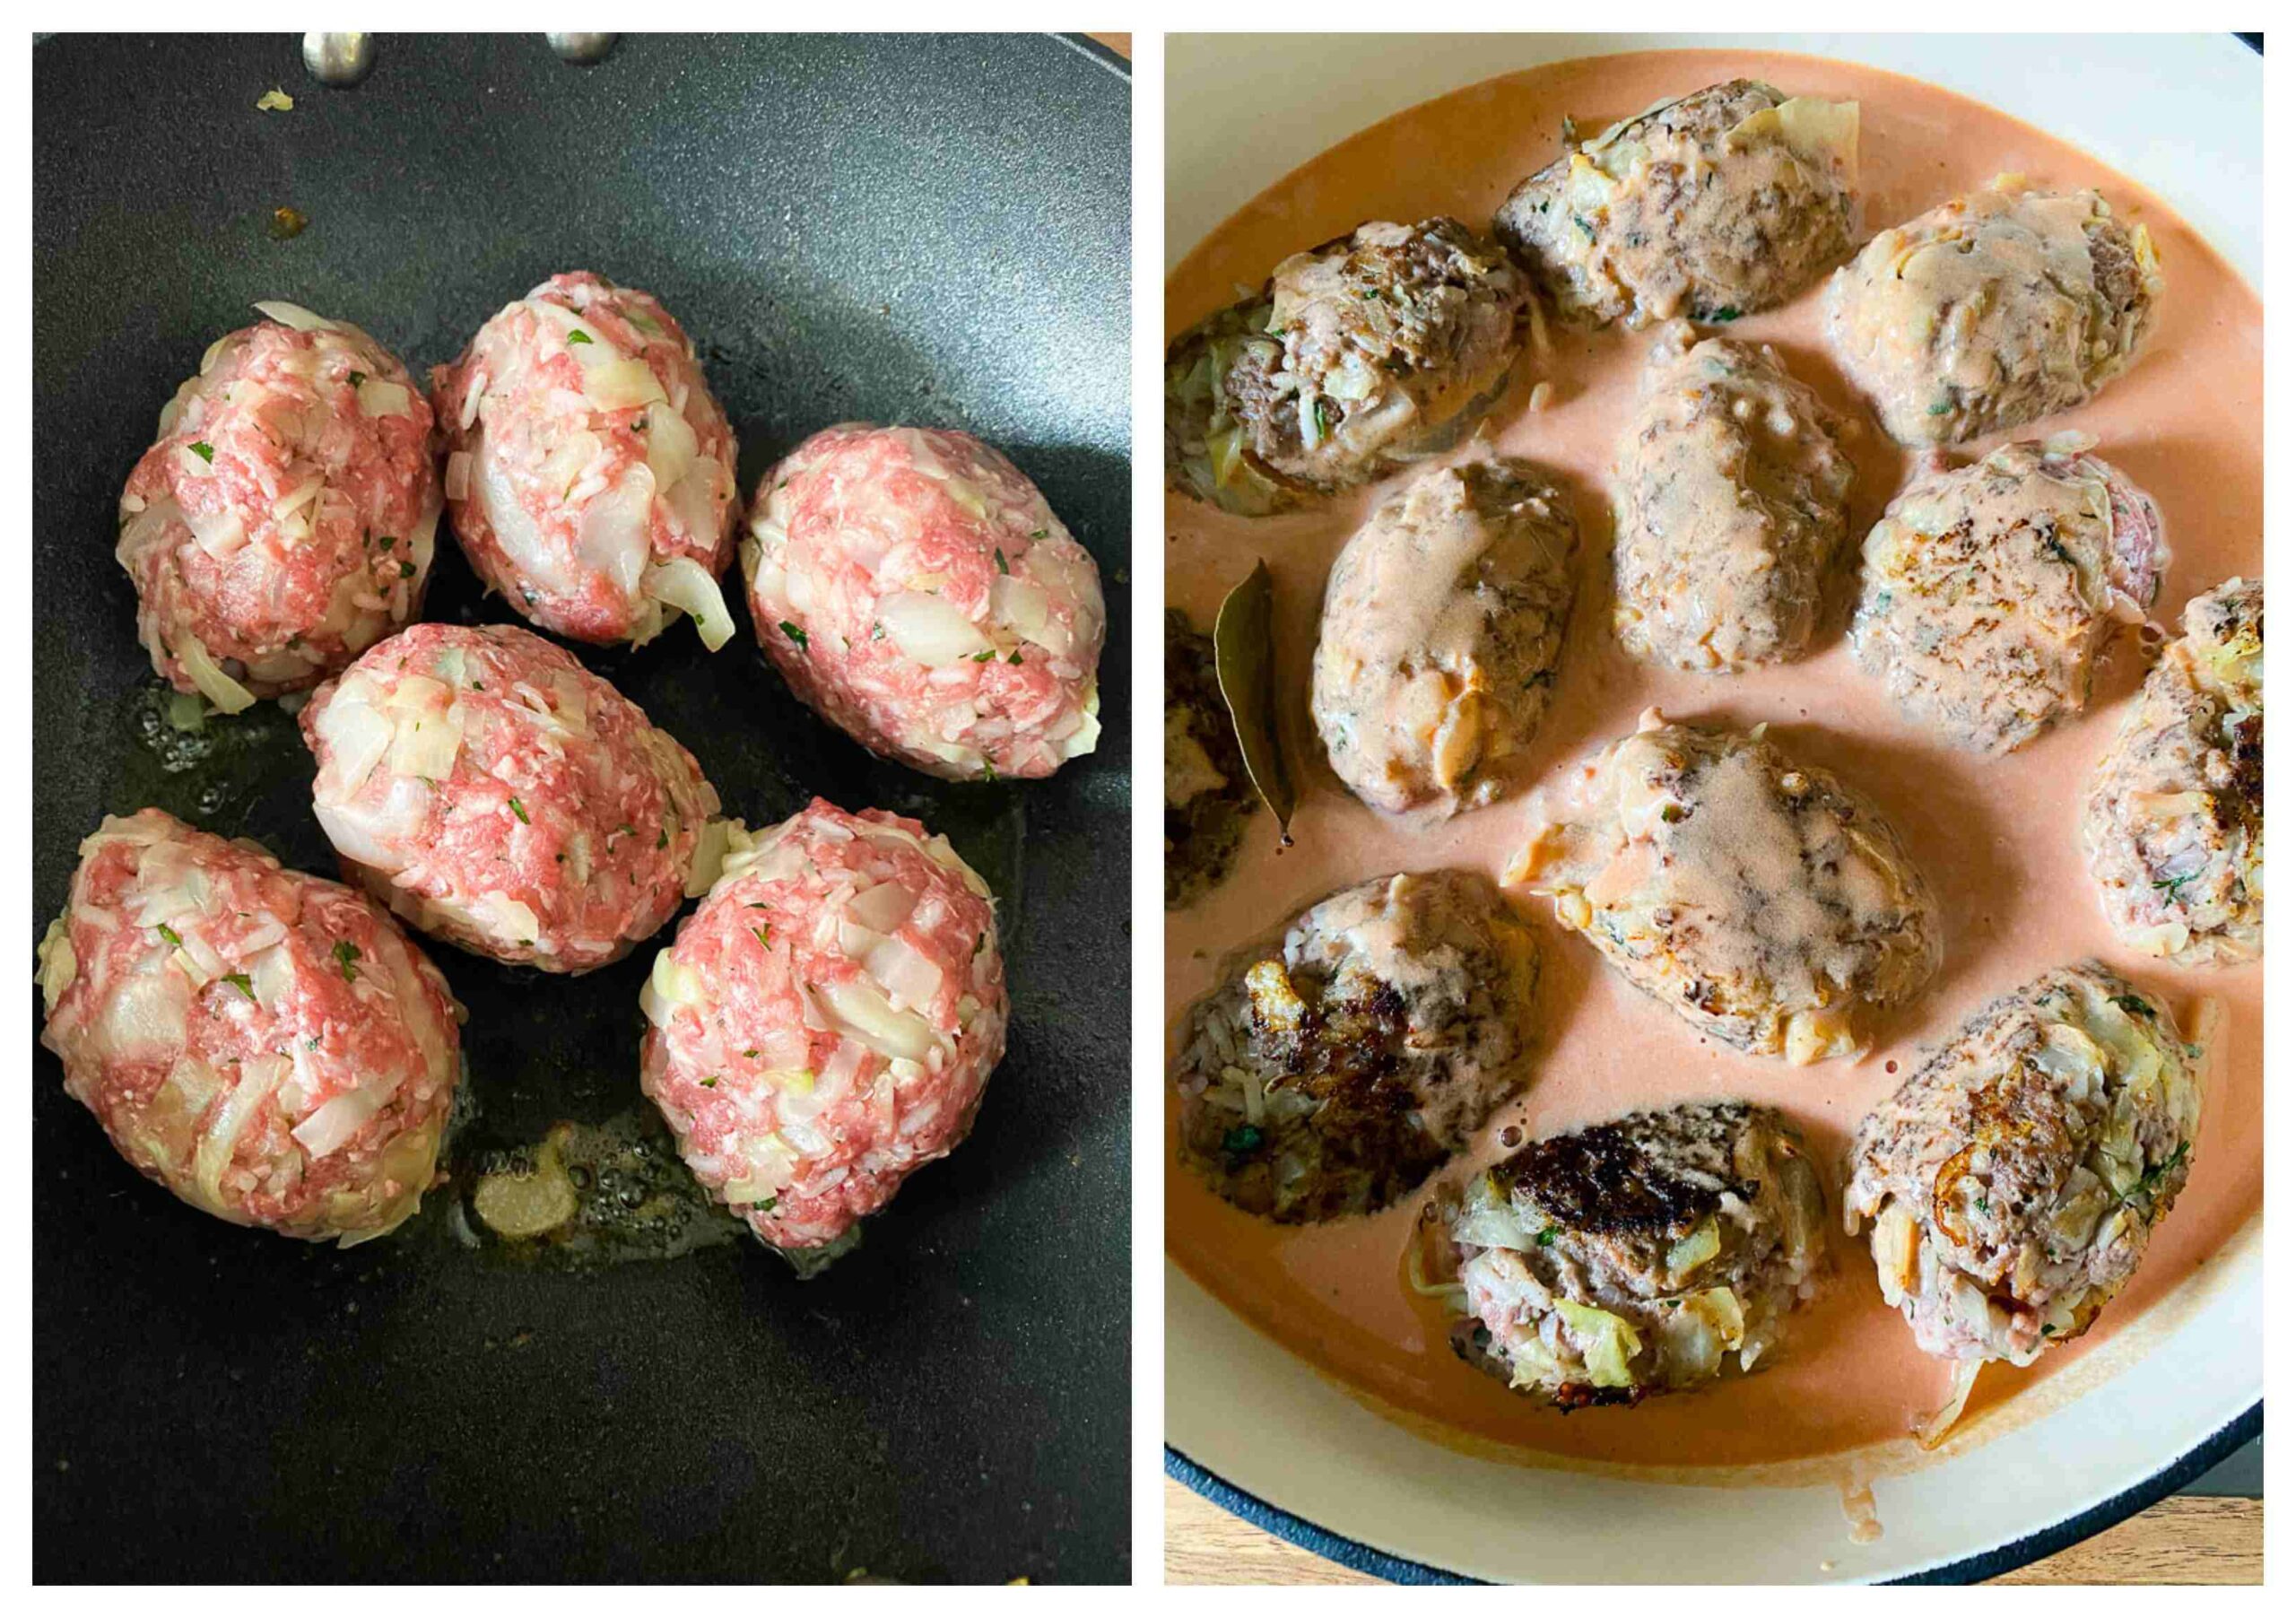 cabbage rolls patties with and without a sauce